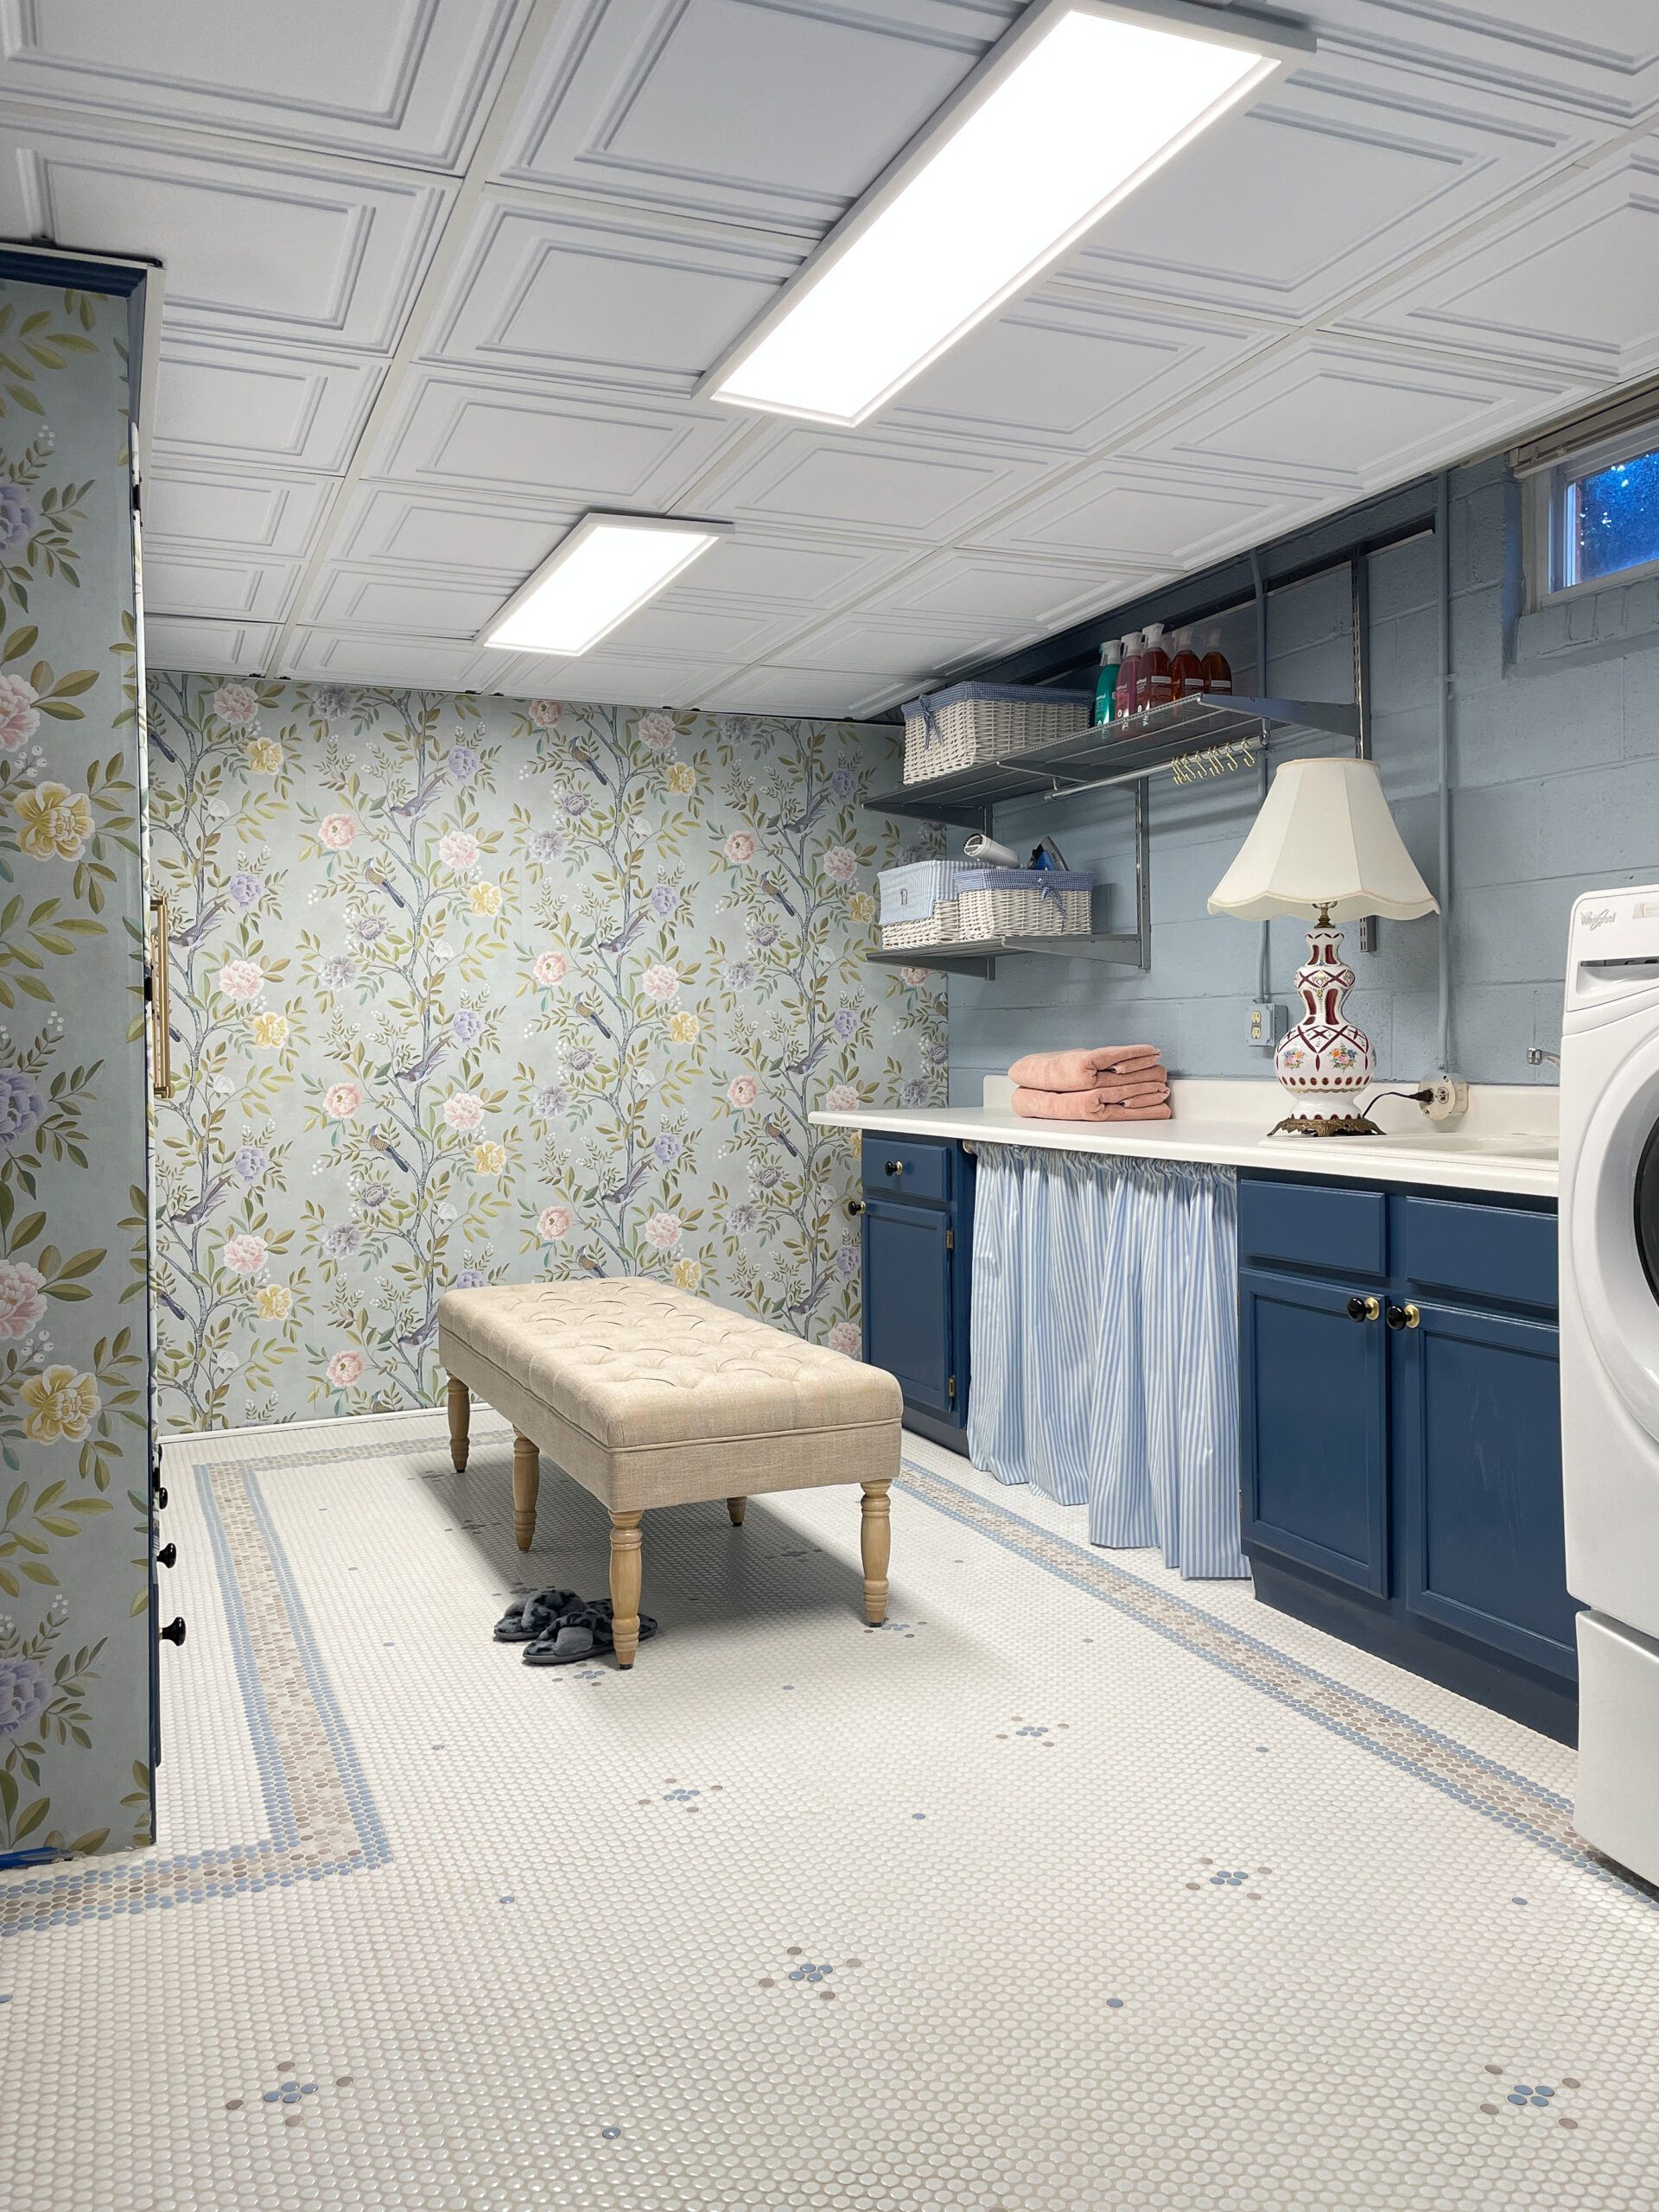 Laundry Room Ideas to Boss Your Dirty Washing  Wallsauce AU